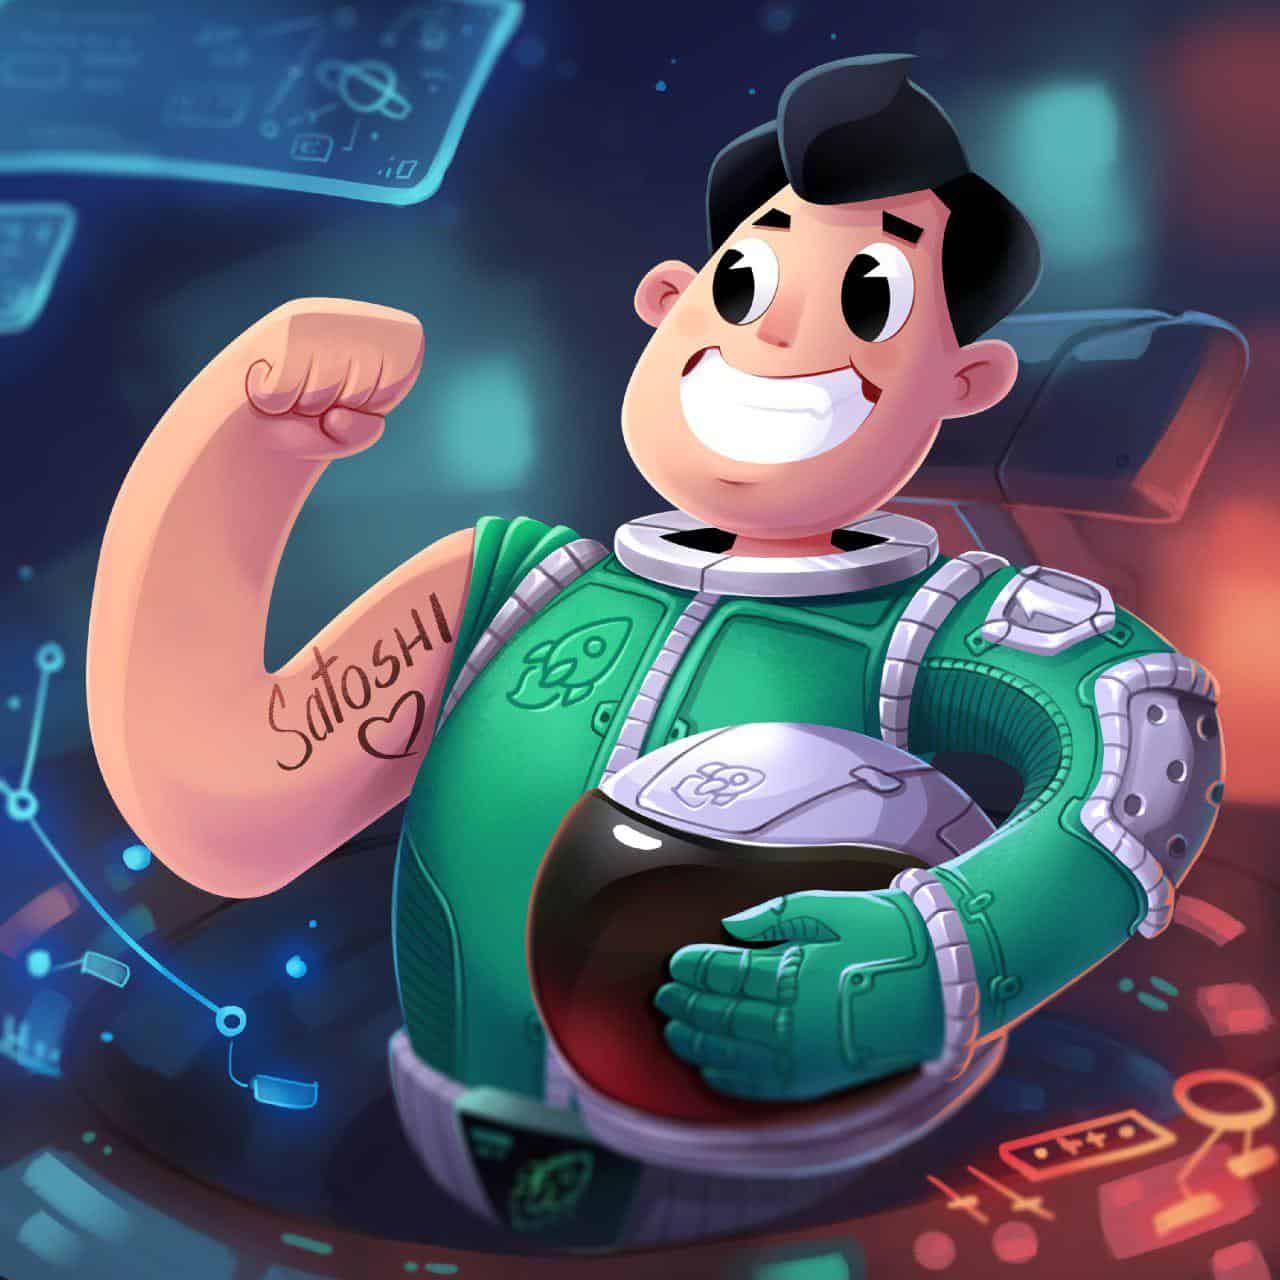 Major Tom changelly multiverse champion The leading gaming blockchain, Enjin Coin in partnership with Changelly exchange have released a new giveaway to celebrate the Changelly version of EnjinX blockchain explorer. All participants who complete more than 10 actions will receive a "Major Tom".